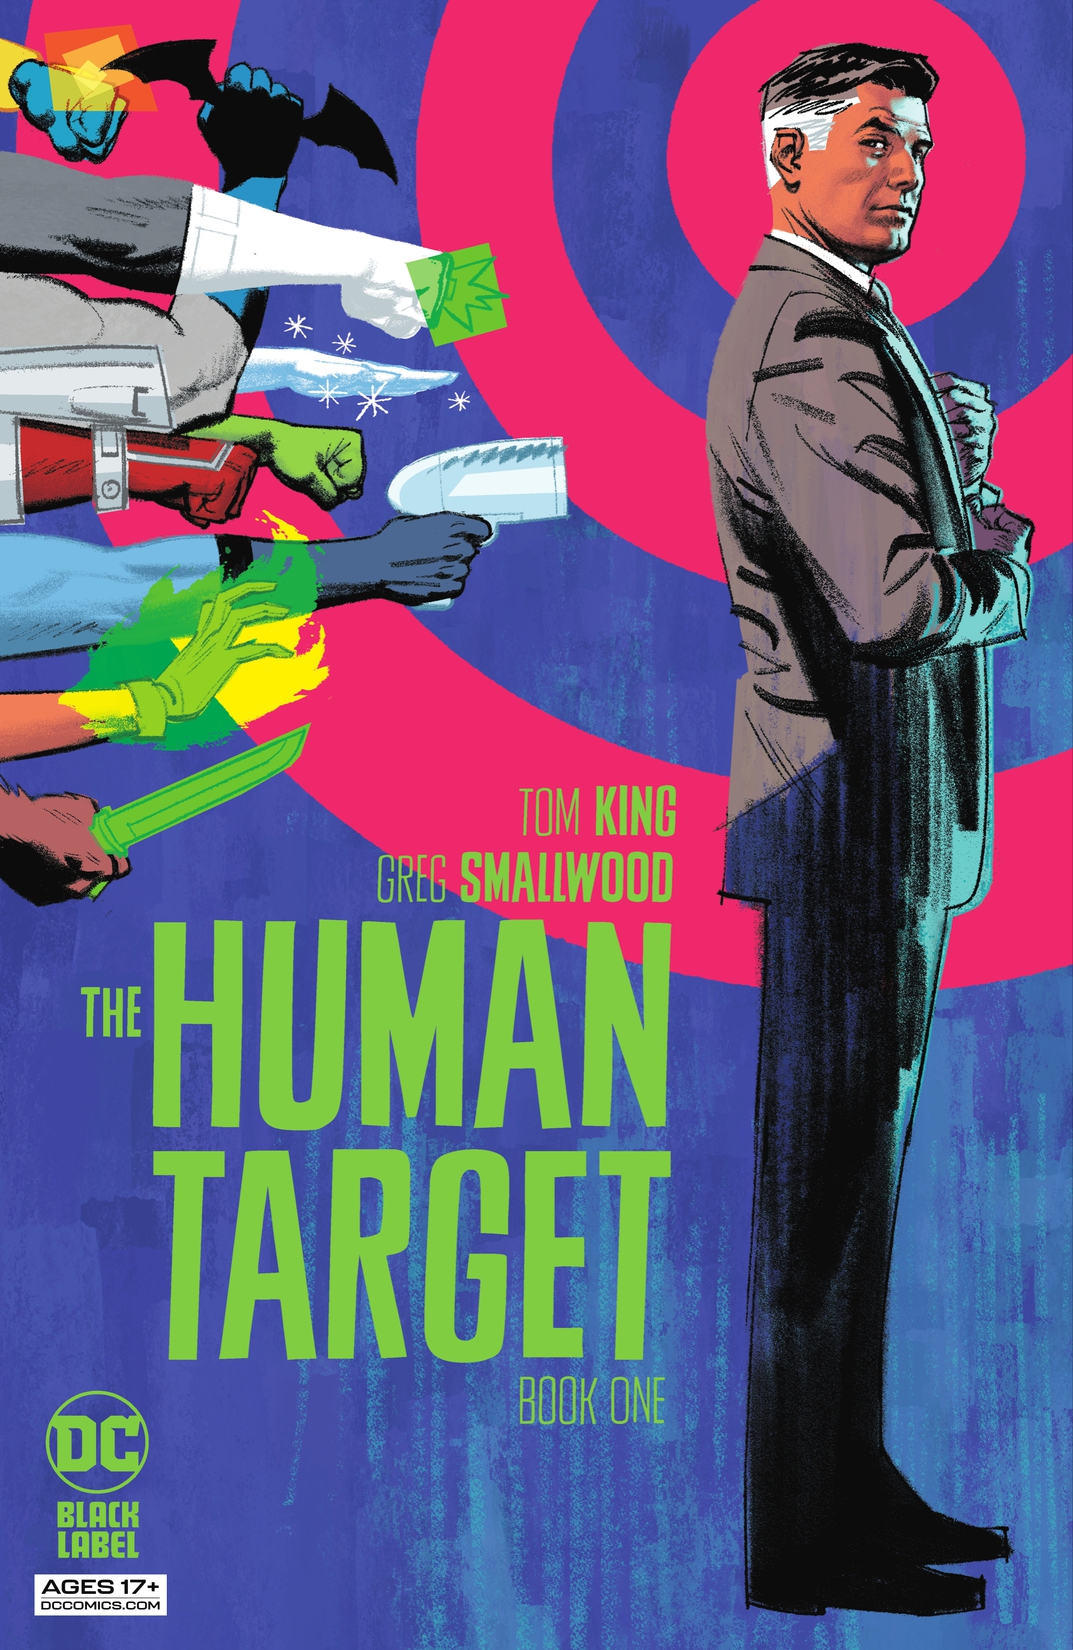 The Human Target #1 preview images